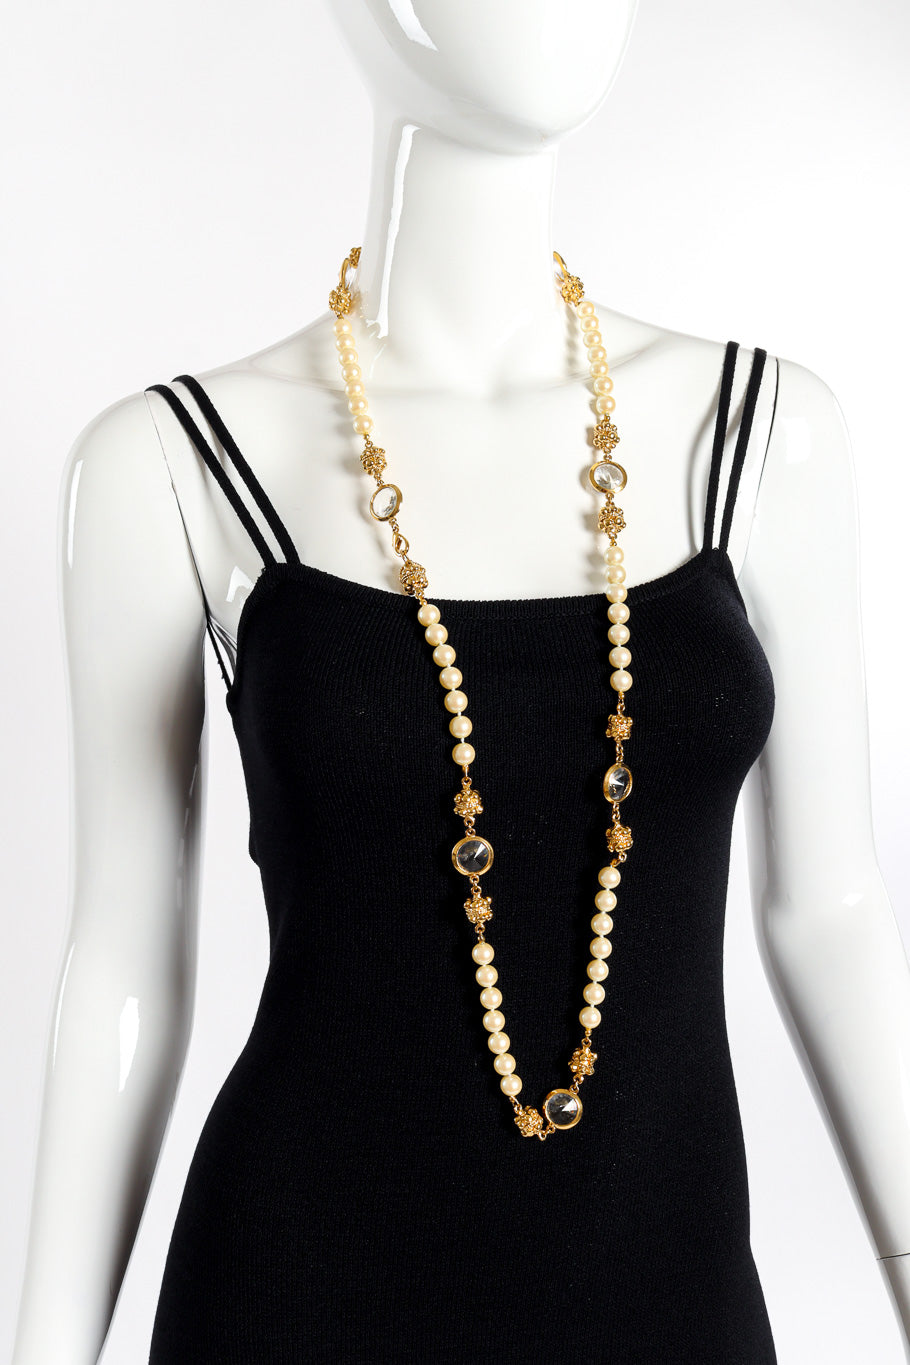 Vintage St. John Crystal and Pearl Chain Necklace on mannequin @recessla